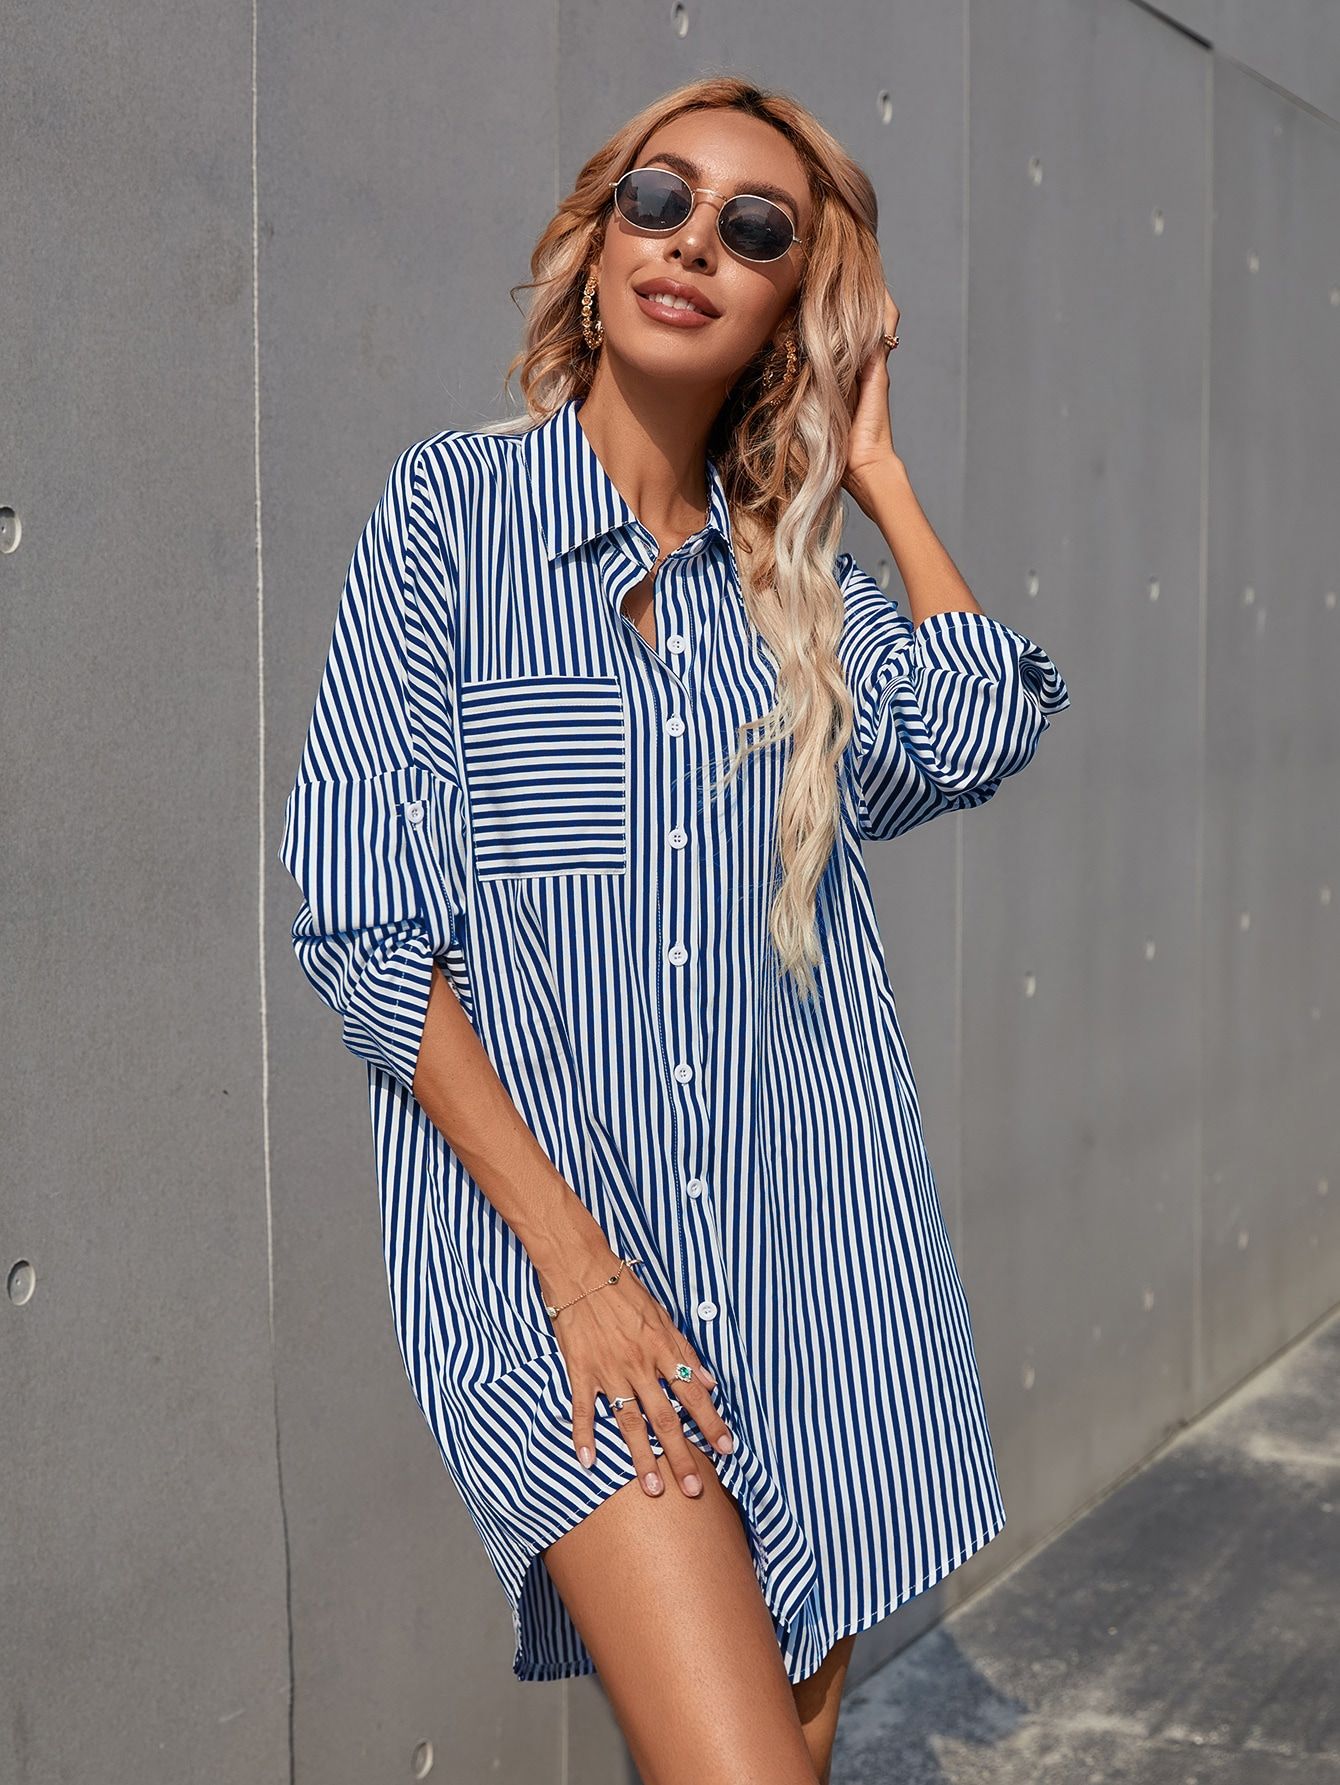 Summer Beach Dresses 2023: Find Your Perfect Look for Sun, Sand, and Surf